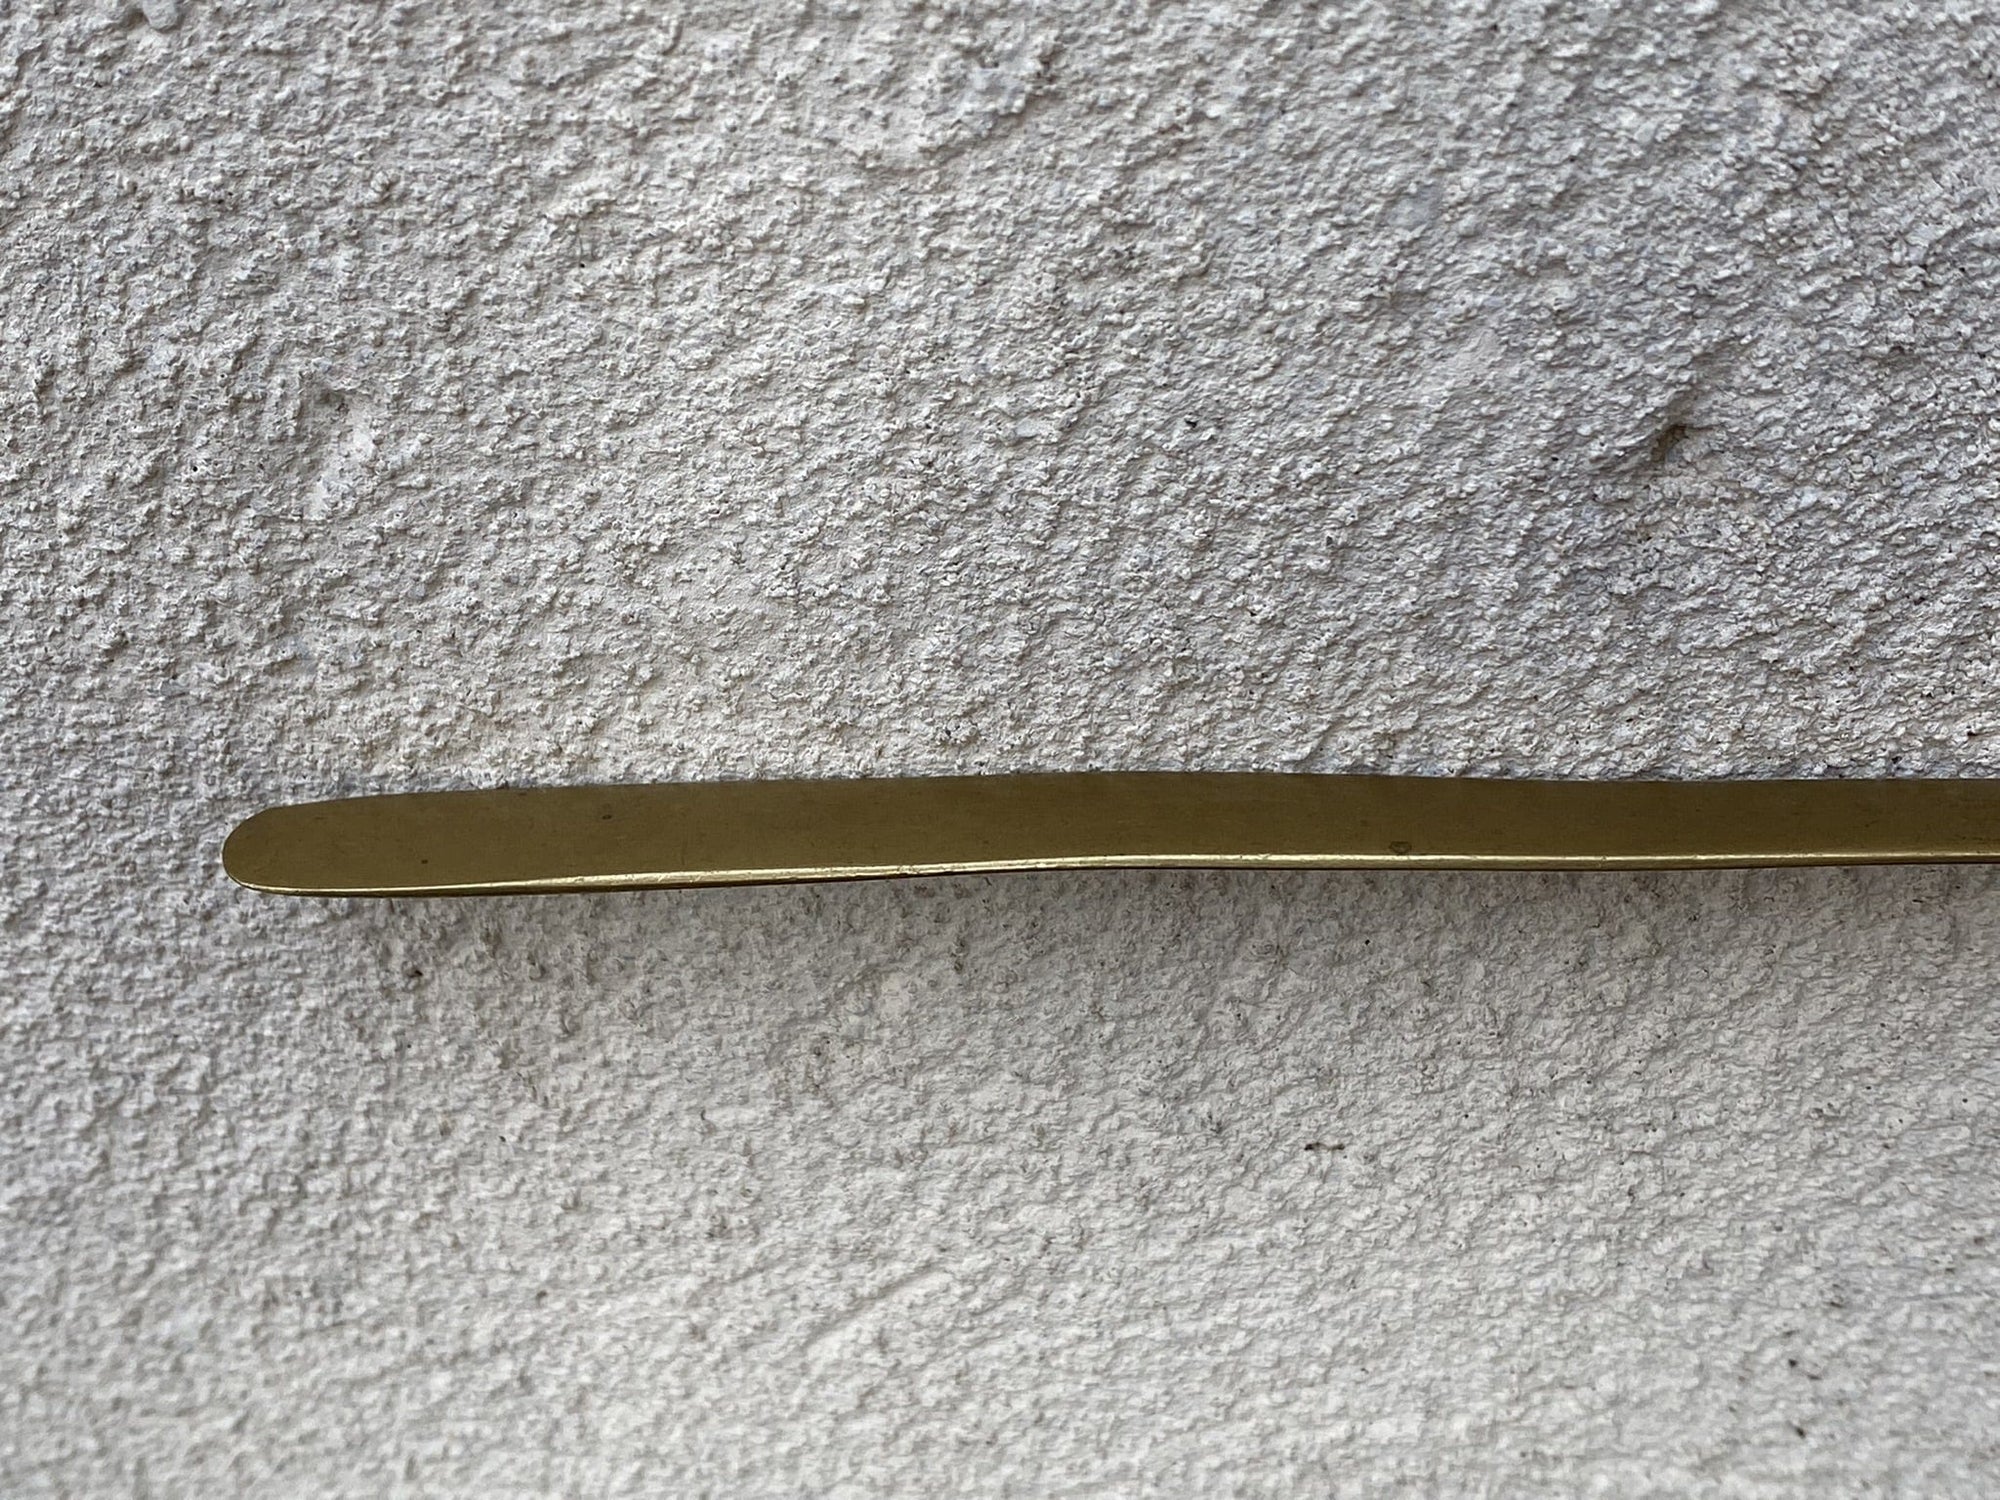 I Like Mike's Mid Century Modern Candle Snuffers Brass Candle Snuffer with Flat Handle, 9" Reach